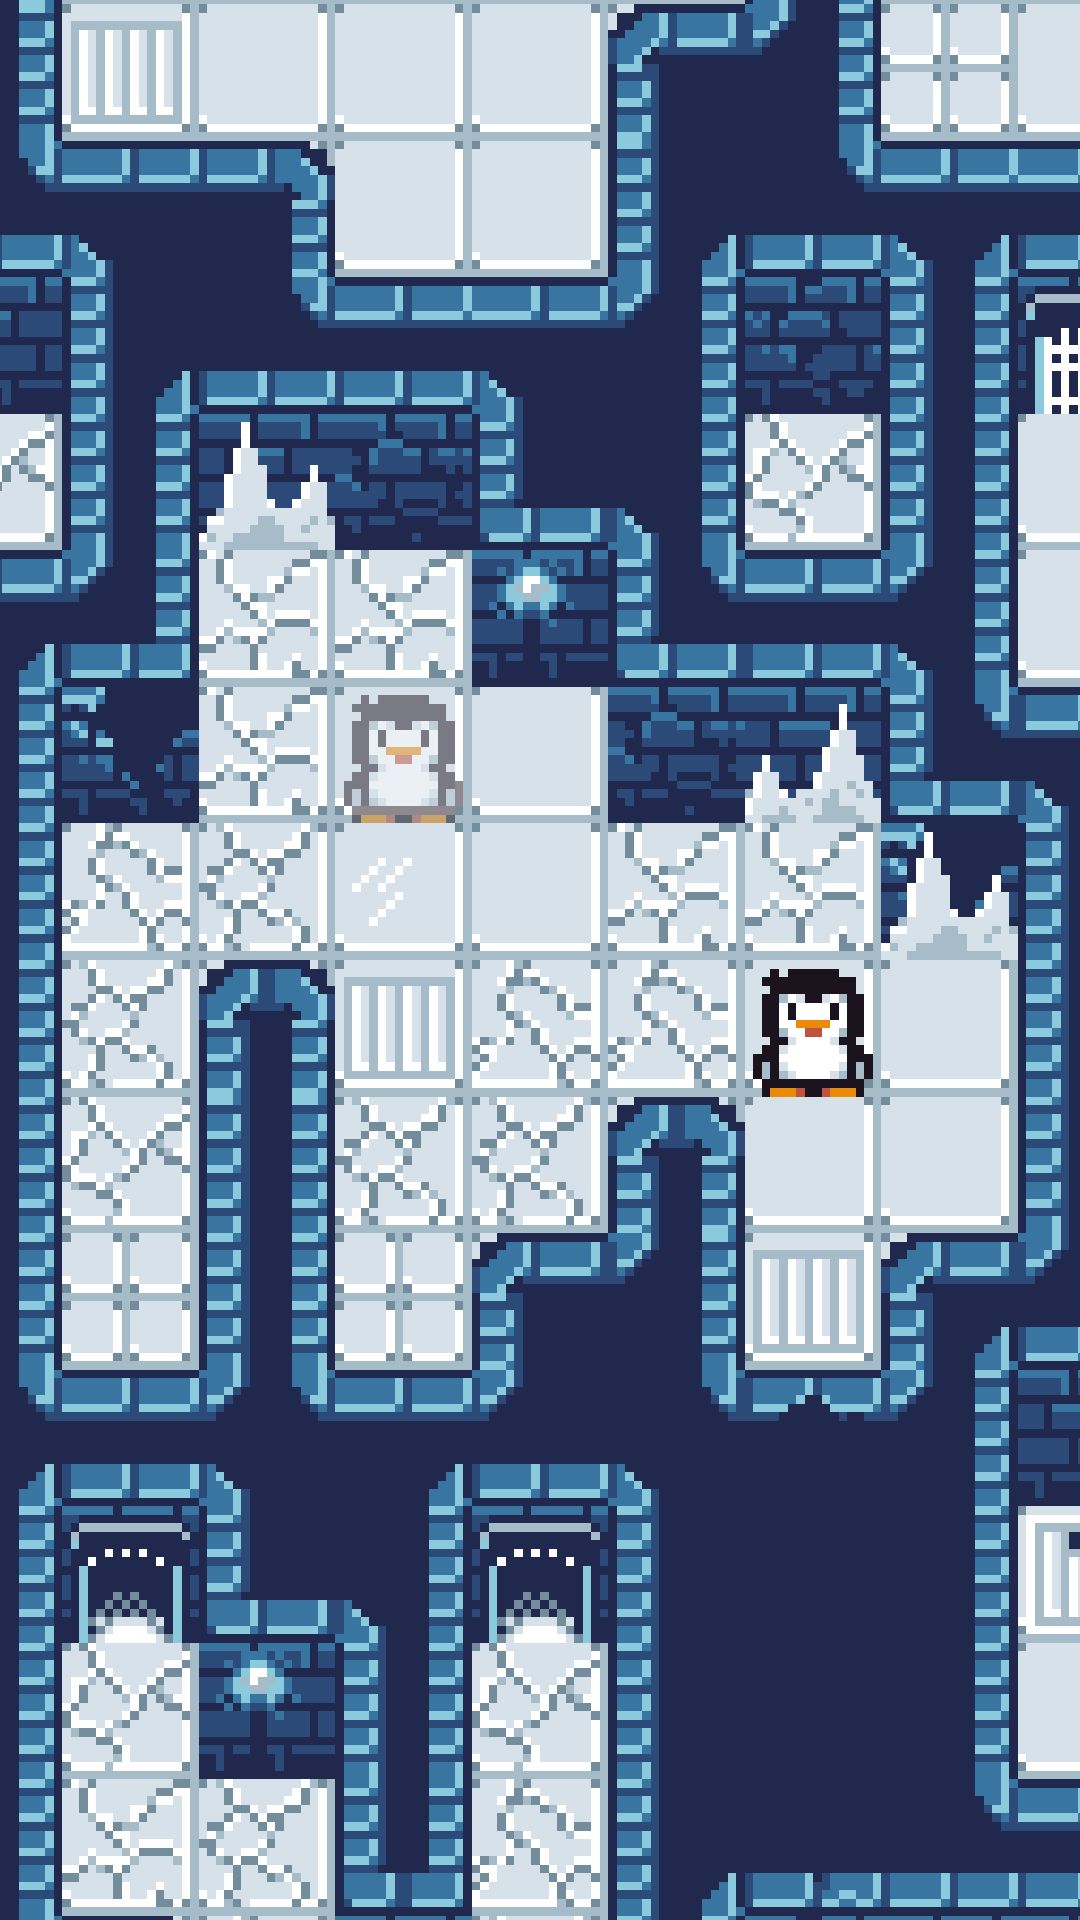 Frosty Fortress - Android game screenshots.